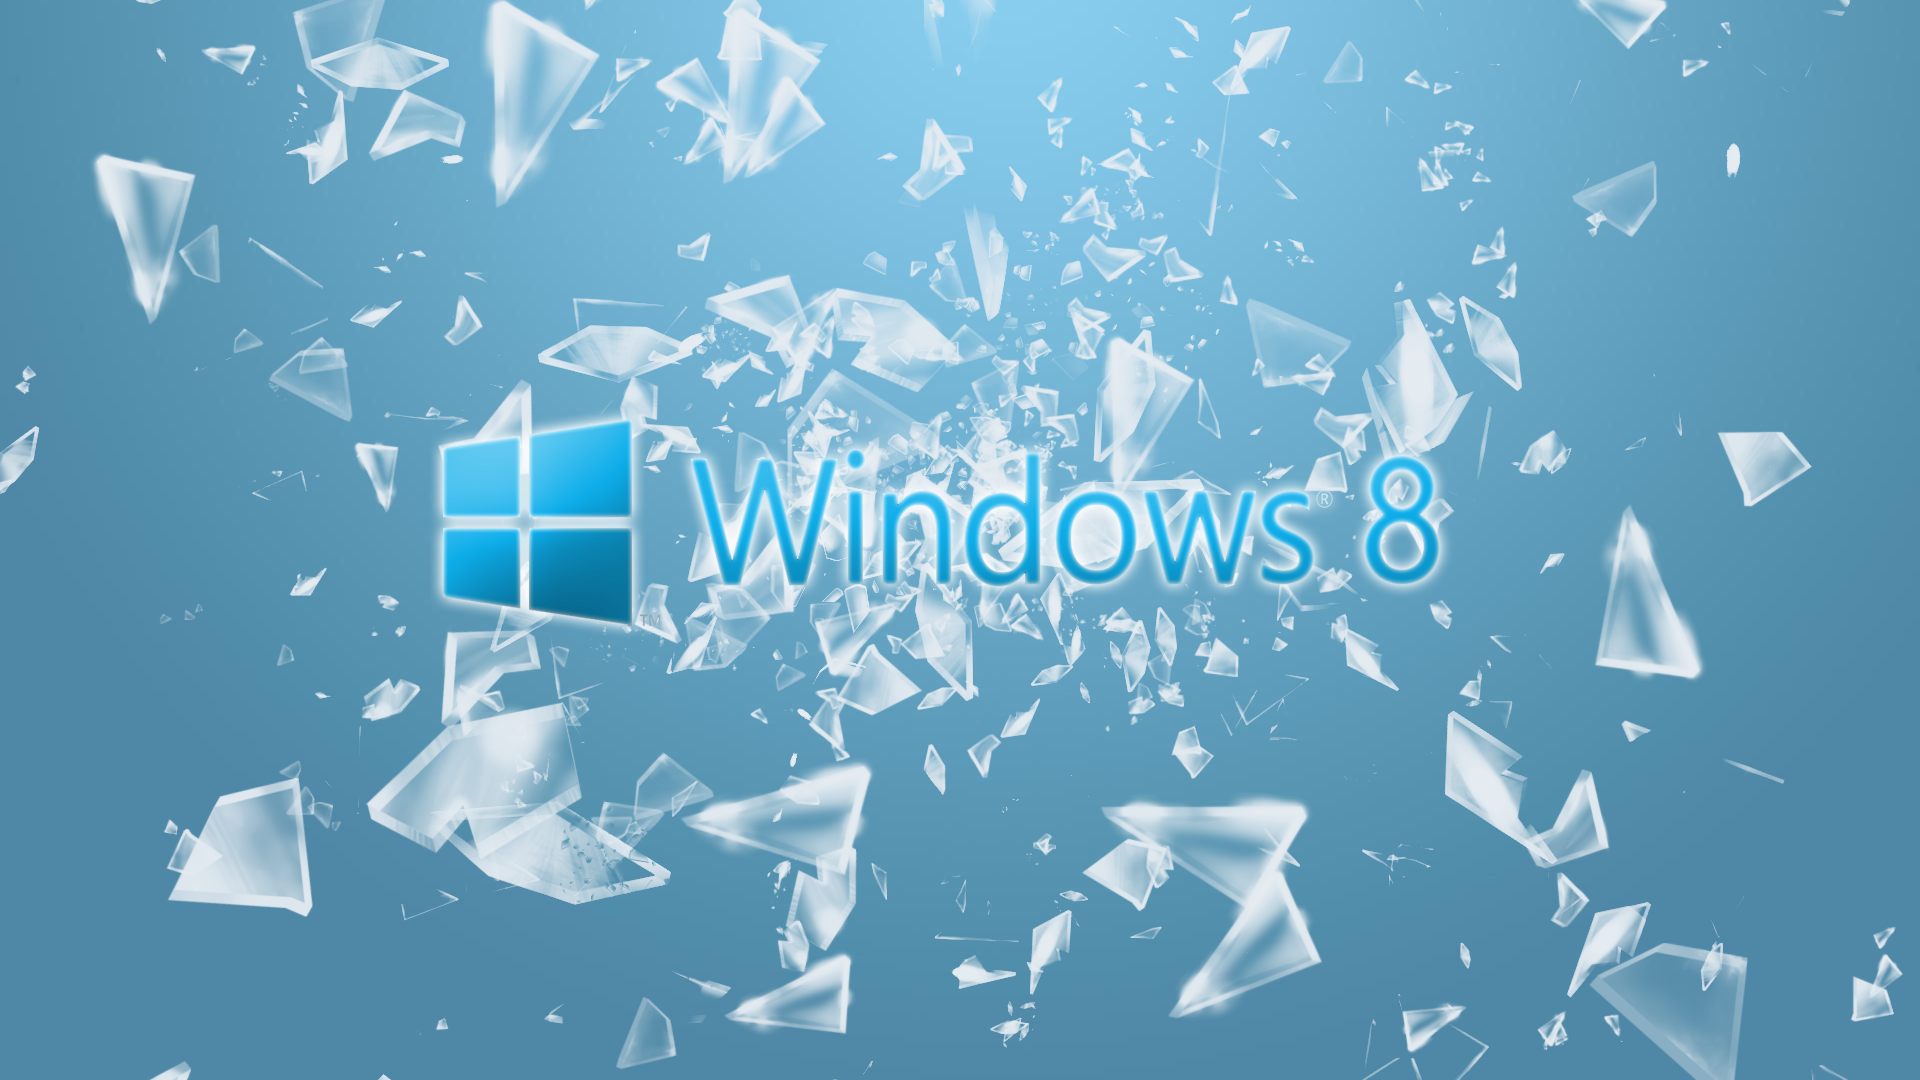 Windows 8 HD Wallpaper Looking for screen savers wallpaper background to make my new OS pop out at you the. Windows wallpaper, 3D nature wallpaper, Wallpaper pc